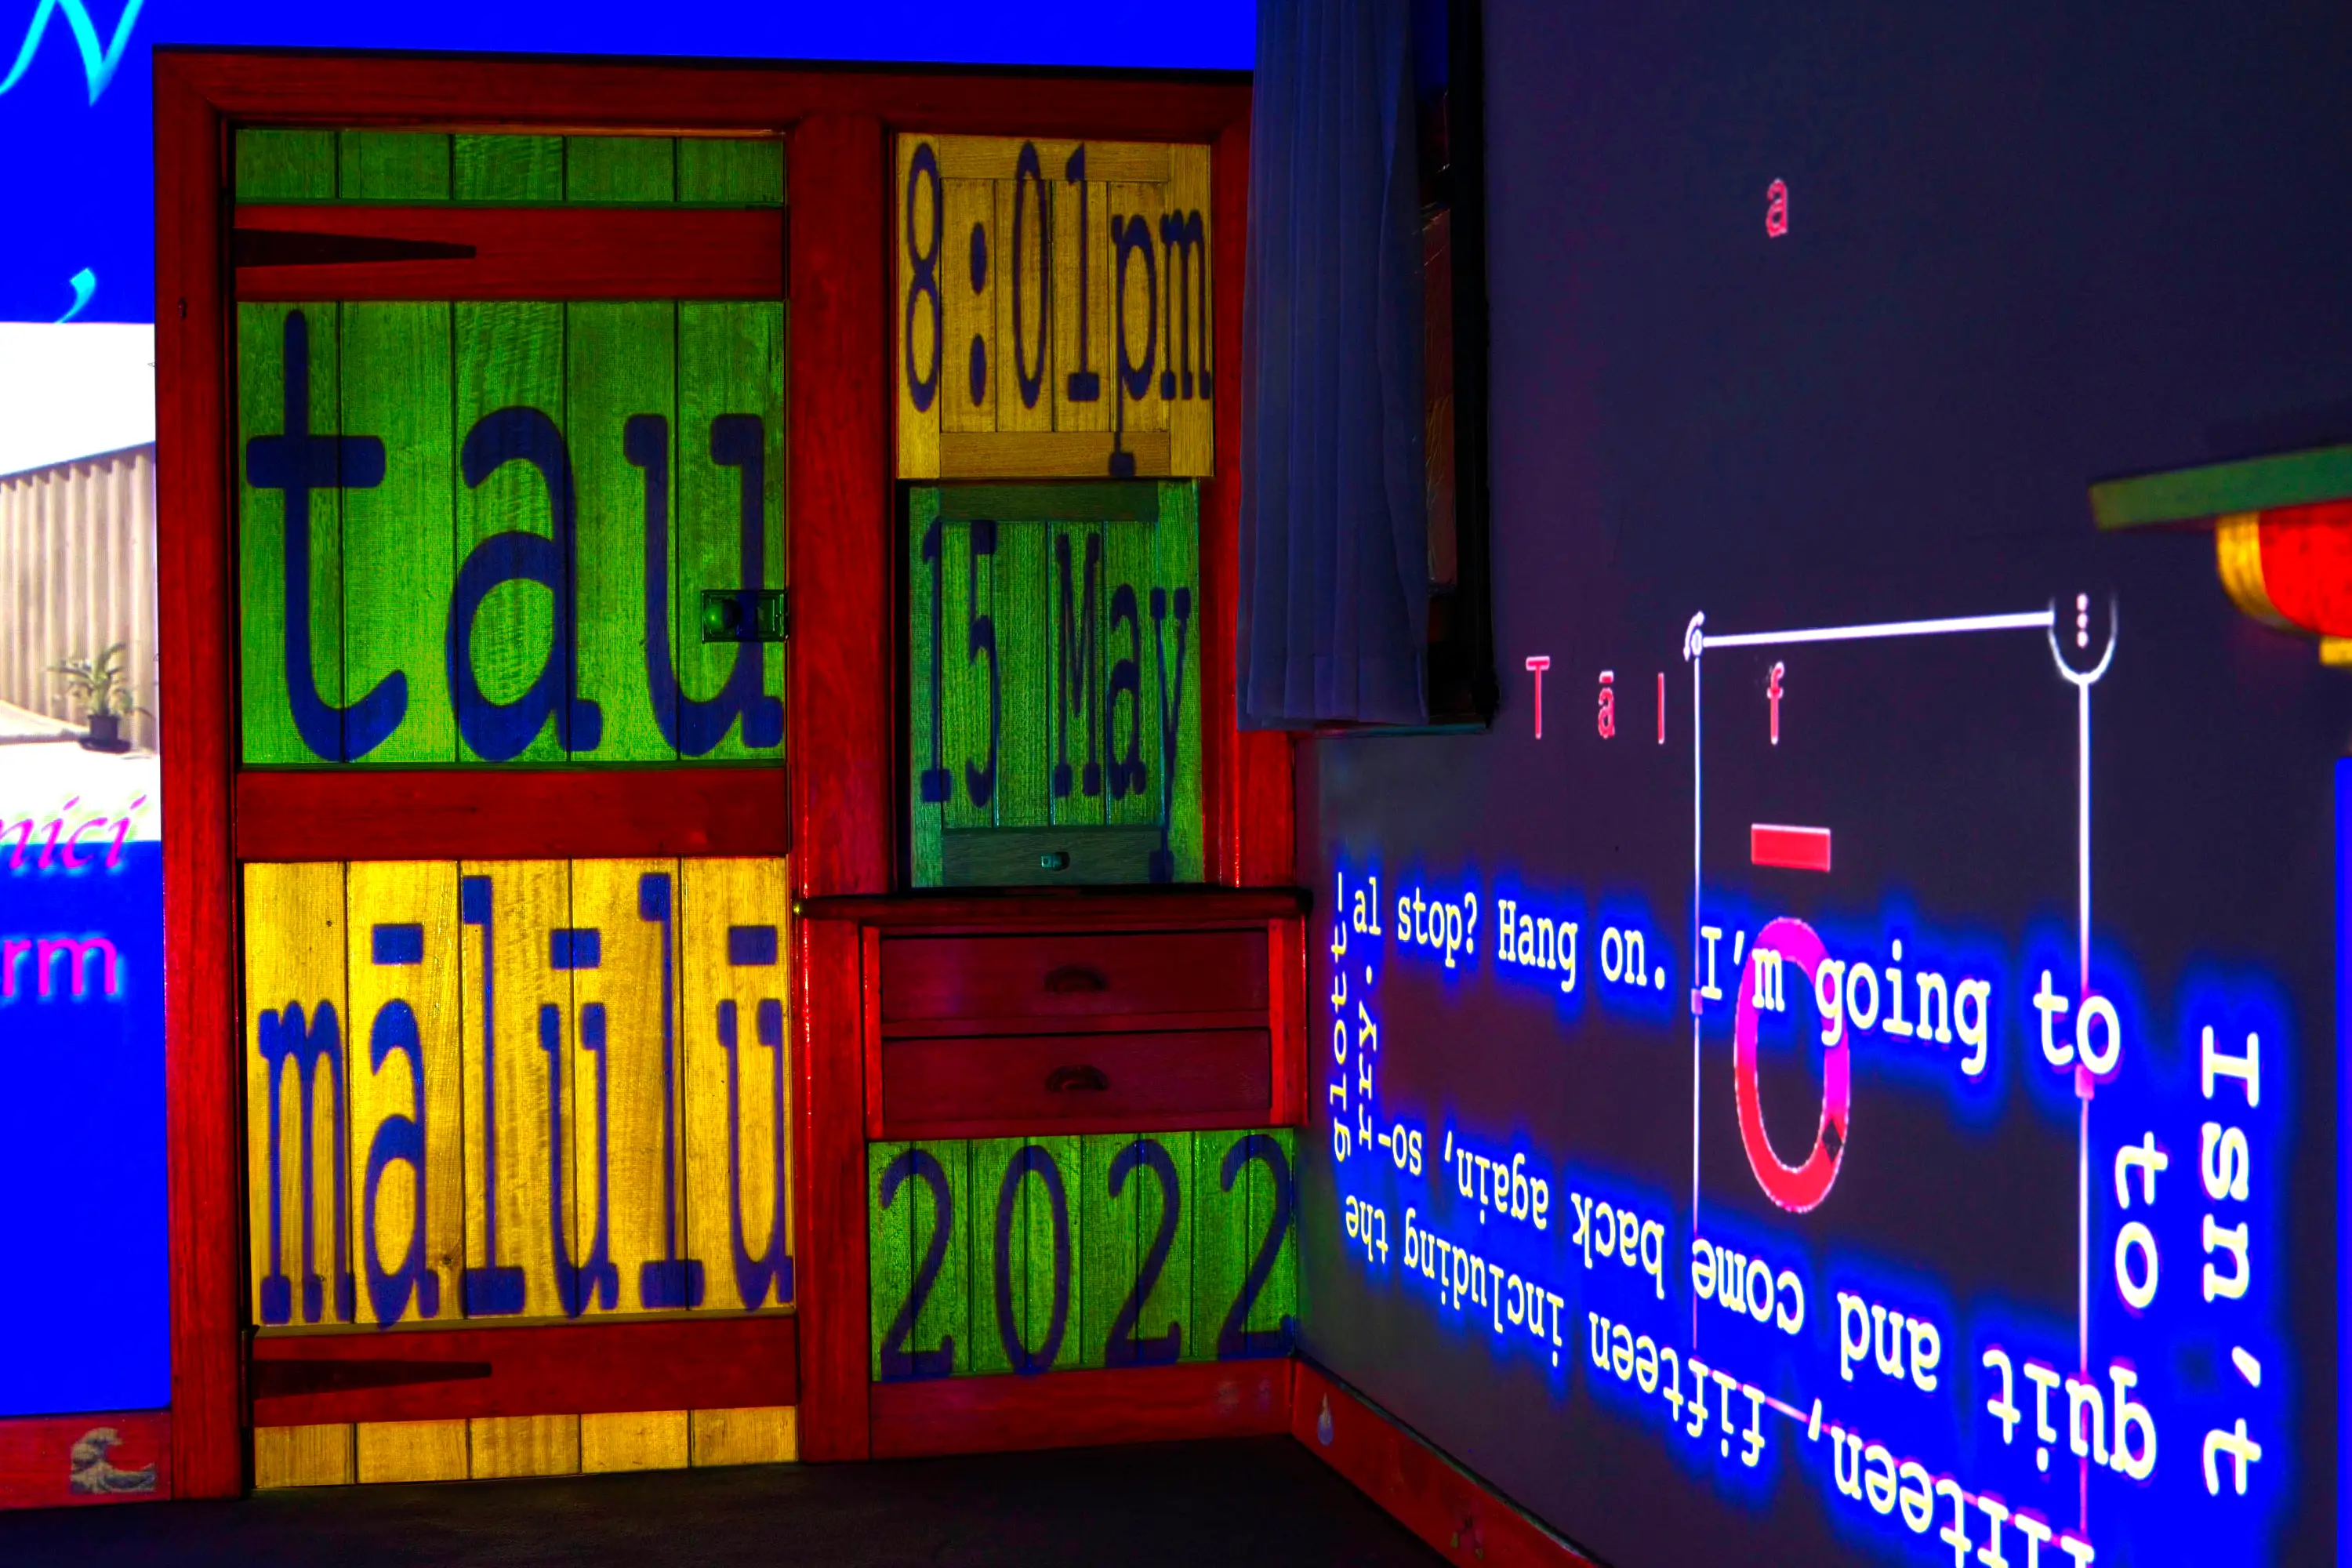 A close up of the coloured panels of the door with text that reads 'tau mālūlū', '8:01pm', '15 May', and '2022'. On the perpendicular wall is a video caption that spirals inward and is yellow with a blue glow, intersecting with the fractured word 'tālofa' in red.